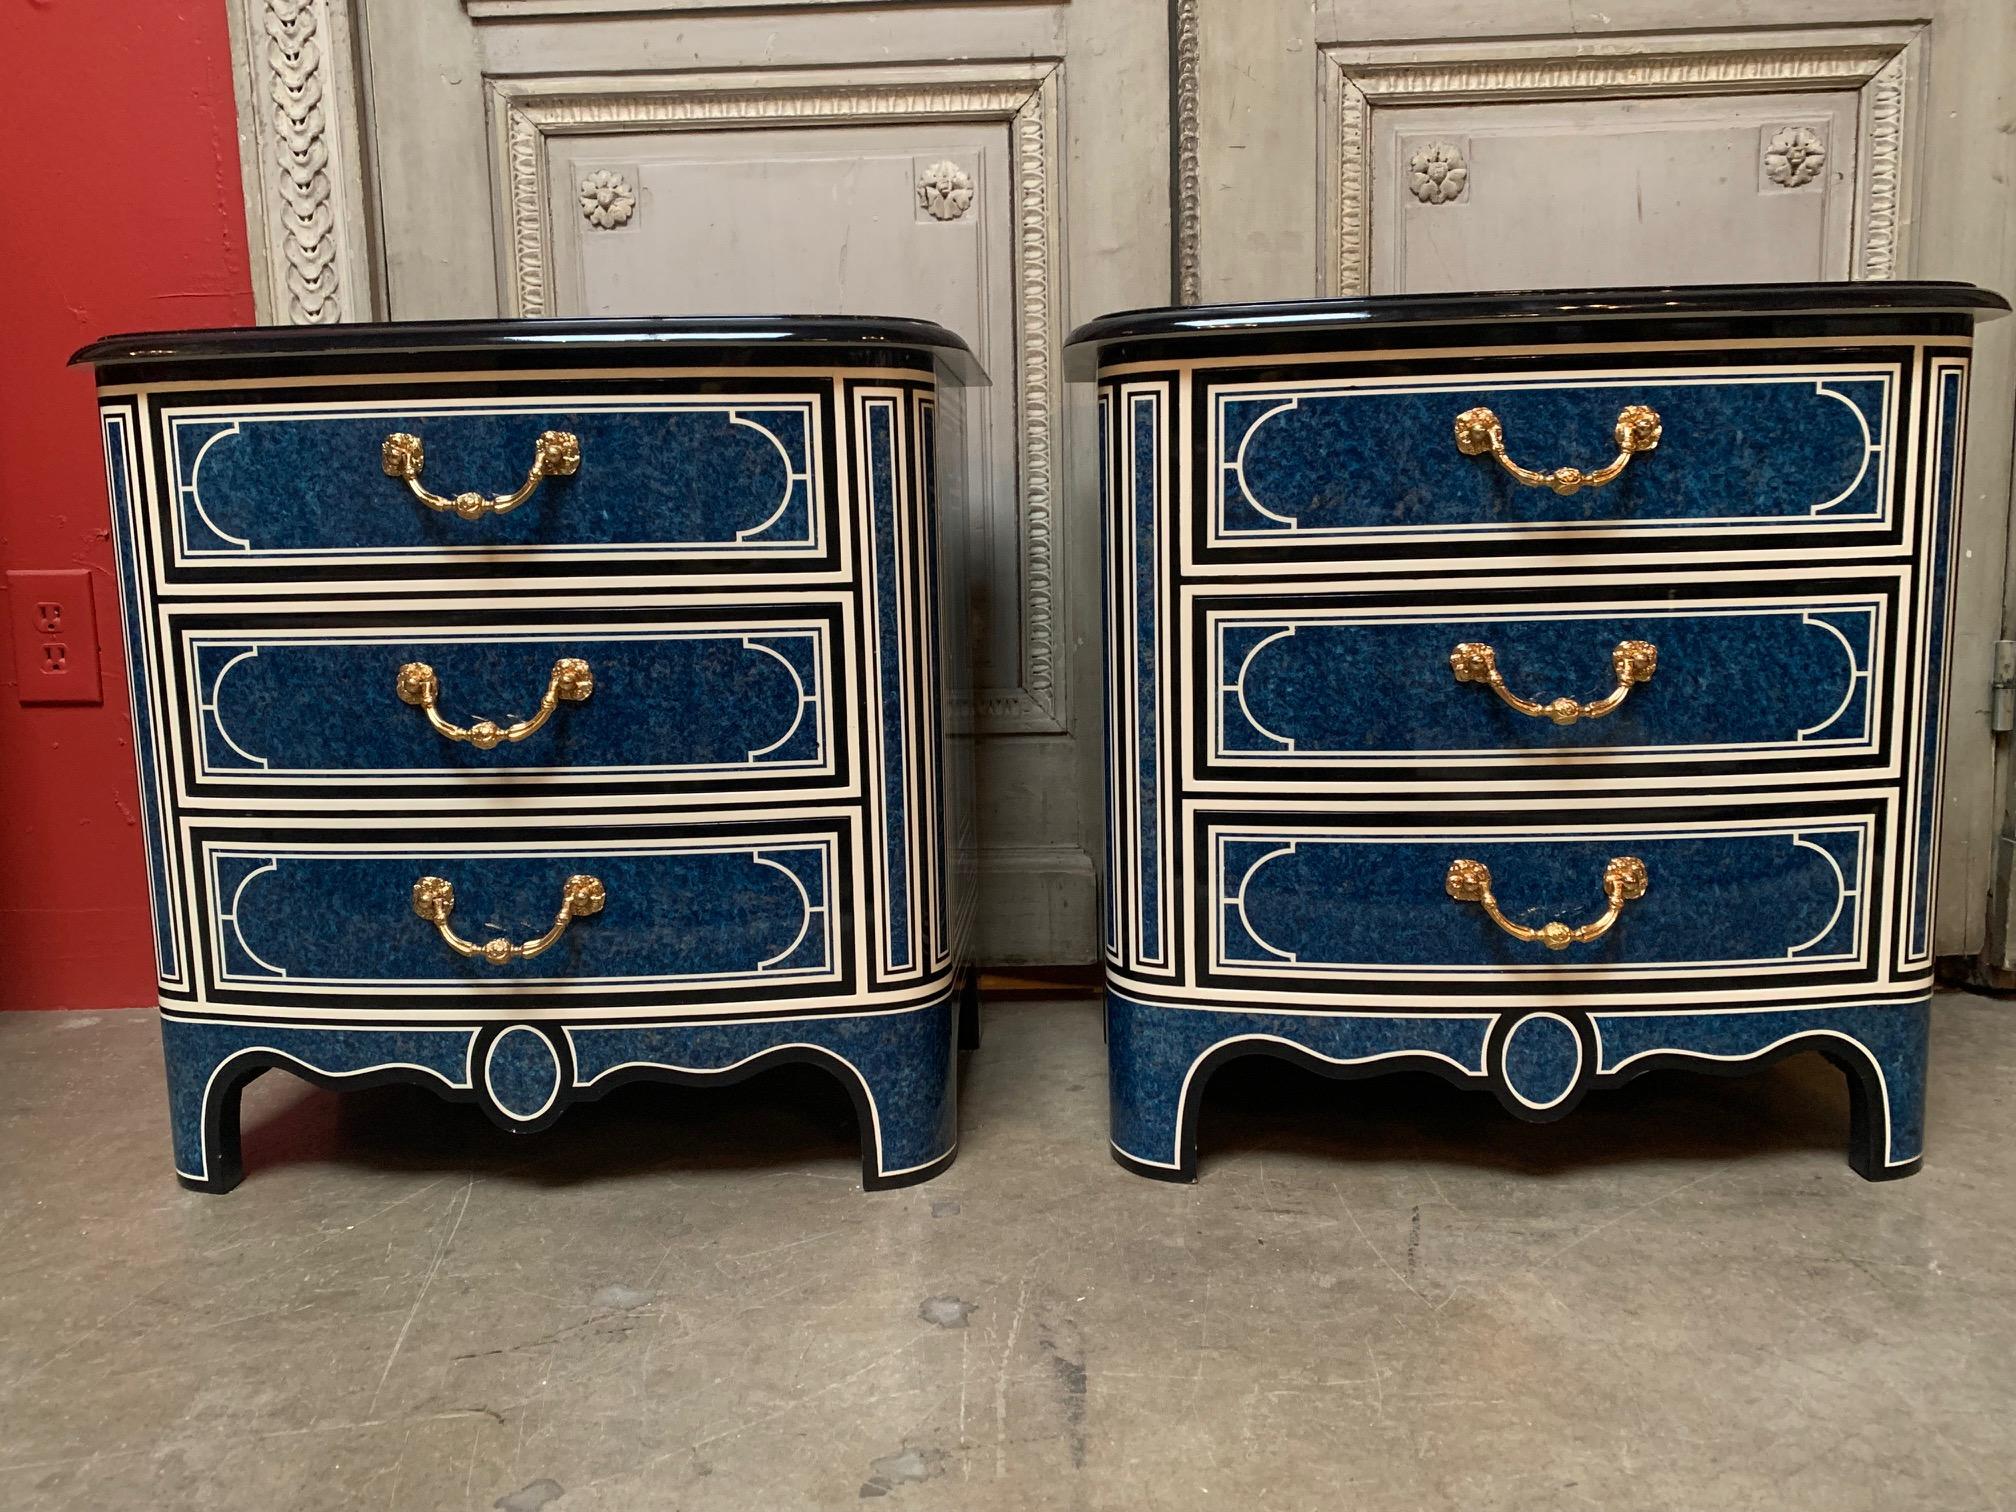 Régence Pair of French Regence Style Commodes with a Blue and White Laquered Finsish